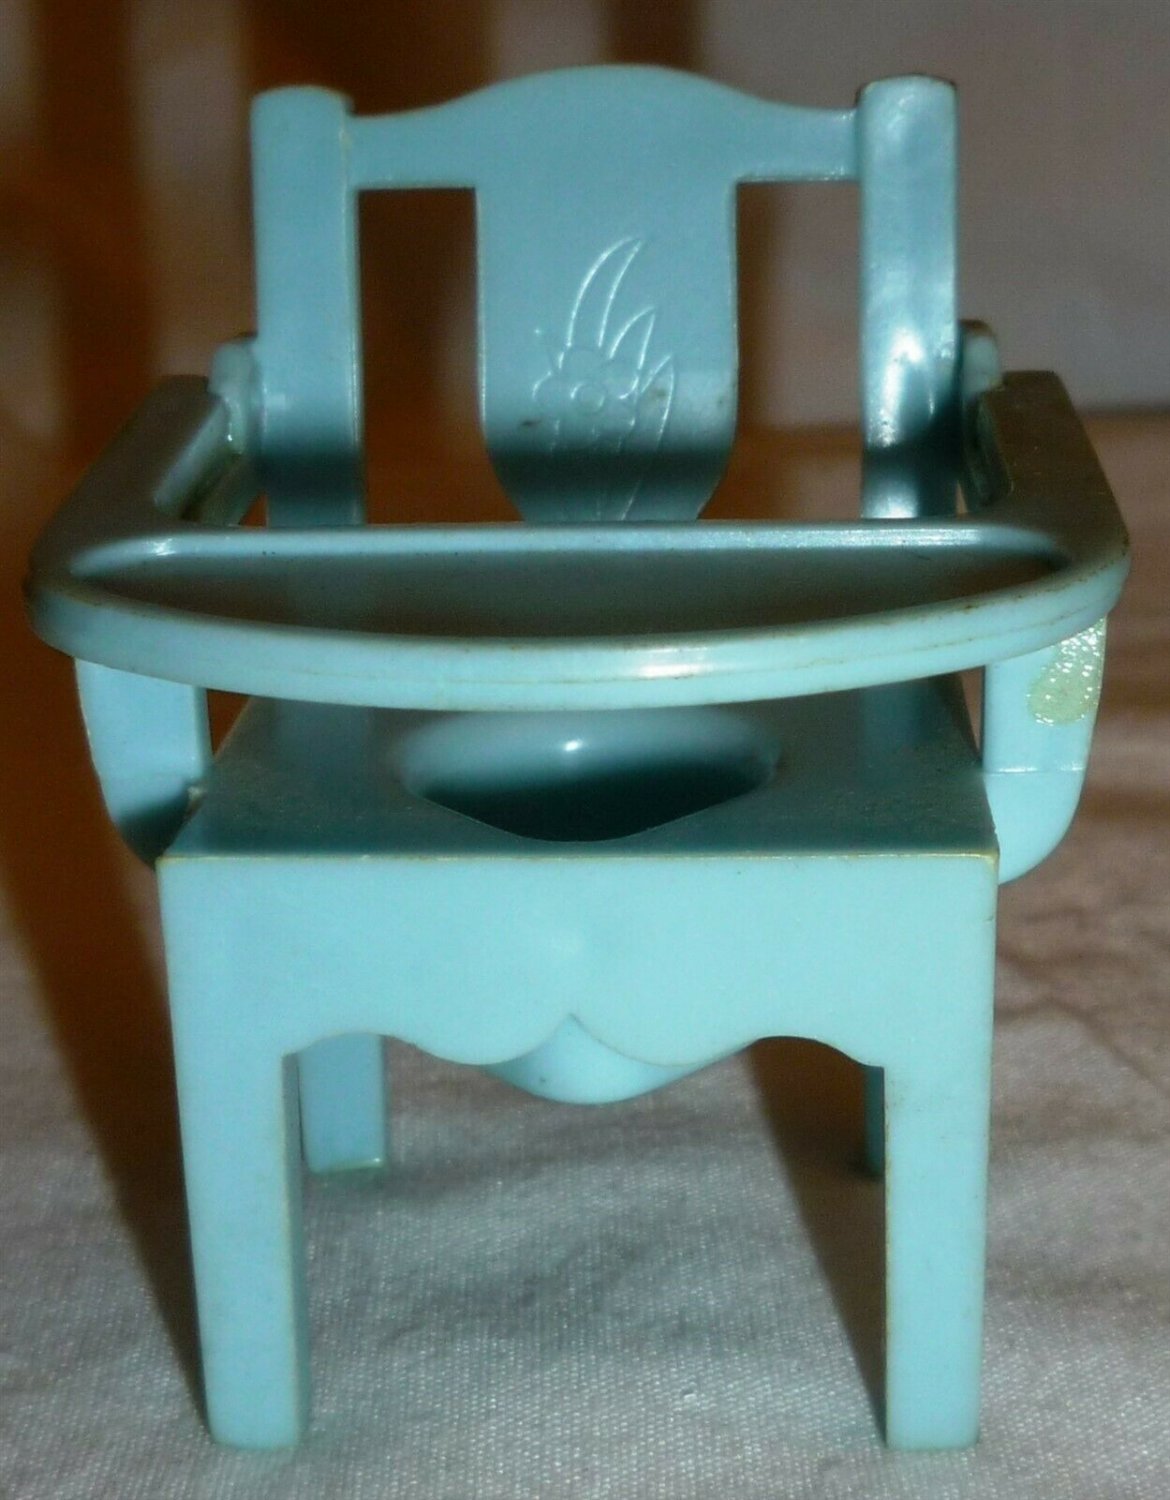 VINTAGE RENWAL BLUE BABY POTTY CHAIR PORTABLE COMMODE DOLLHOUSE MINIATURES BABY